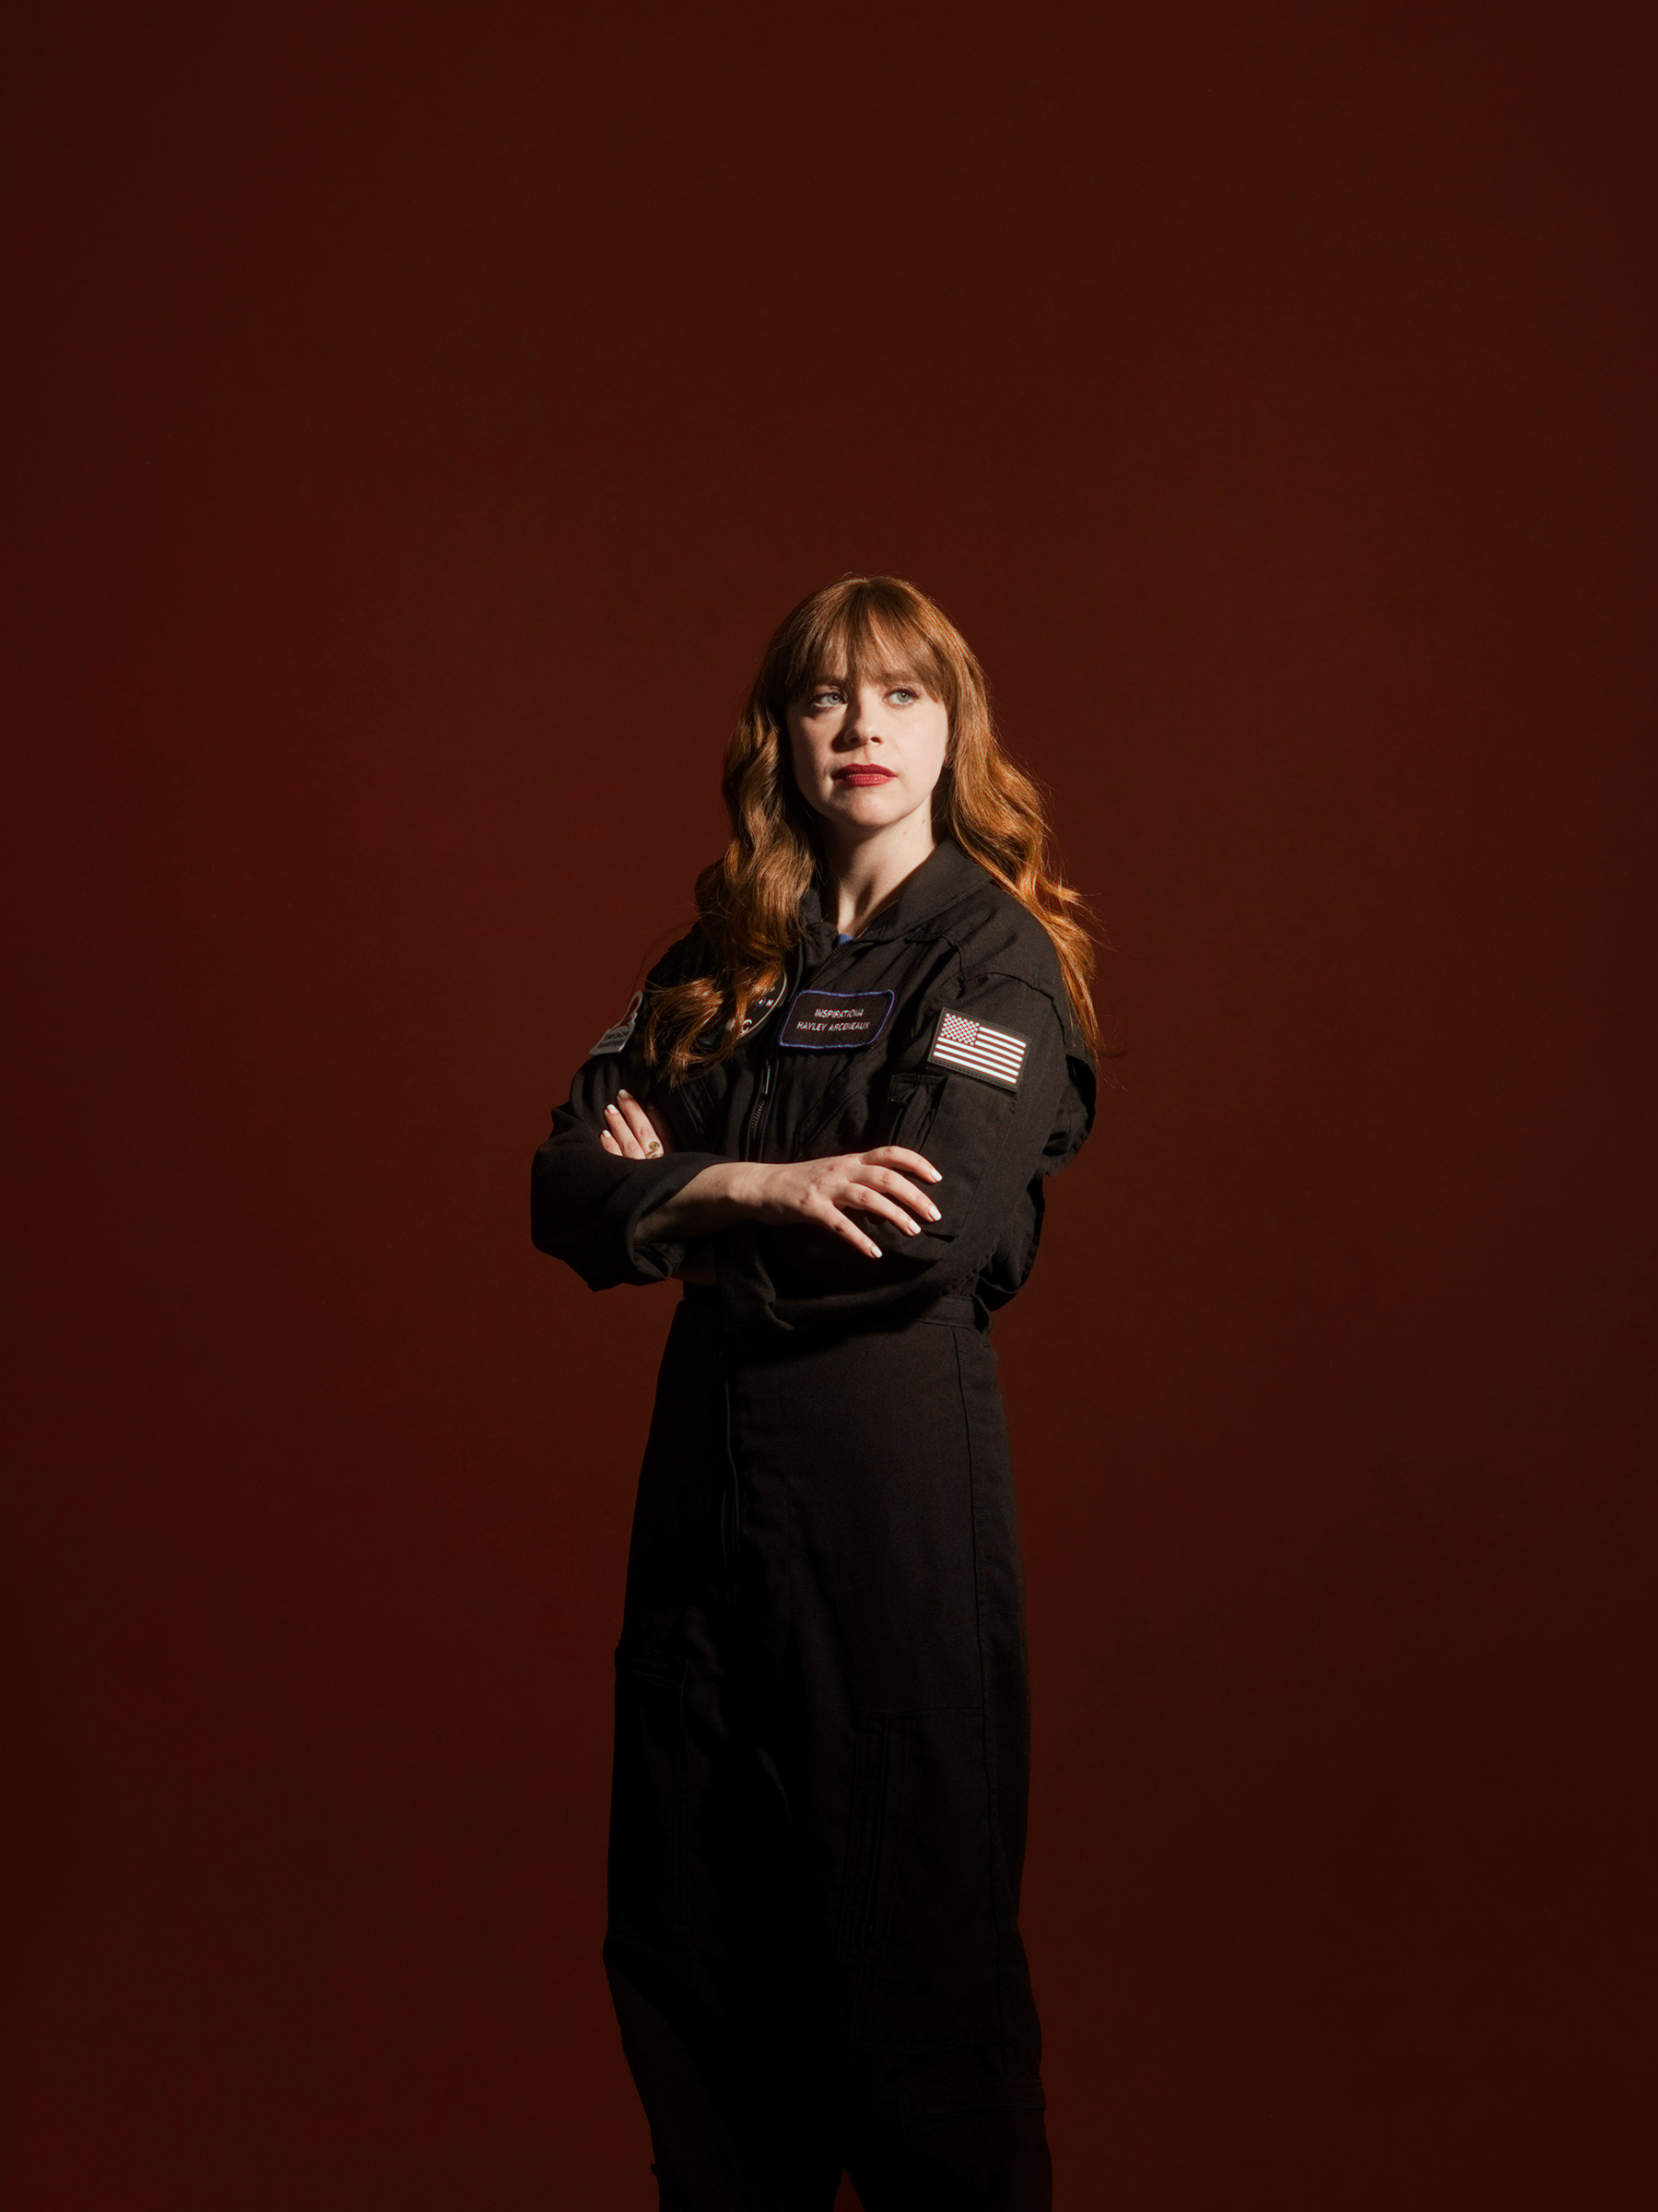 Hayley Arceneaux of the Inspiration4 crew, the world's first all-civilian mission to orbit. (Philip Montgomery for TIME)